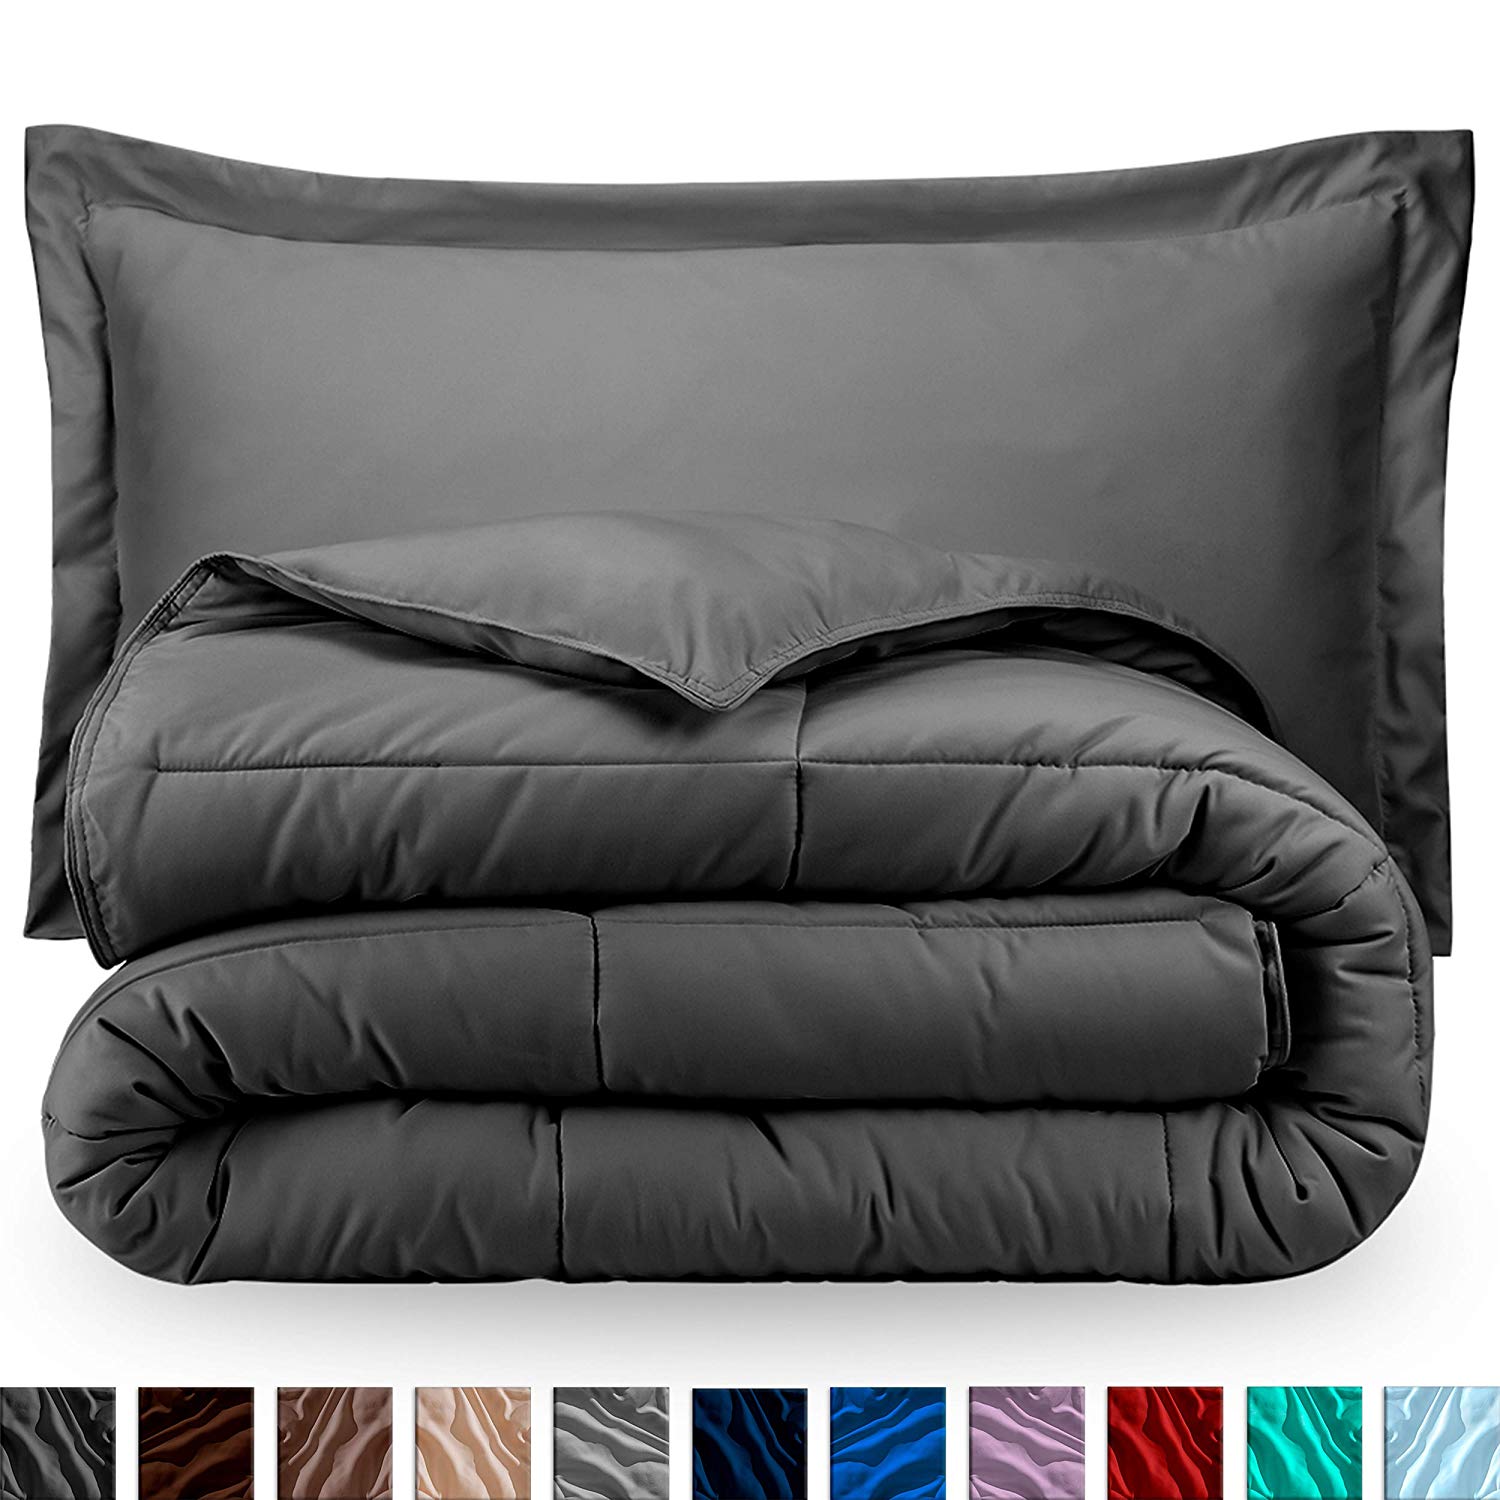 various colors available for a down alternative comforter